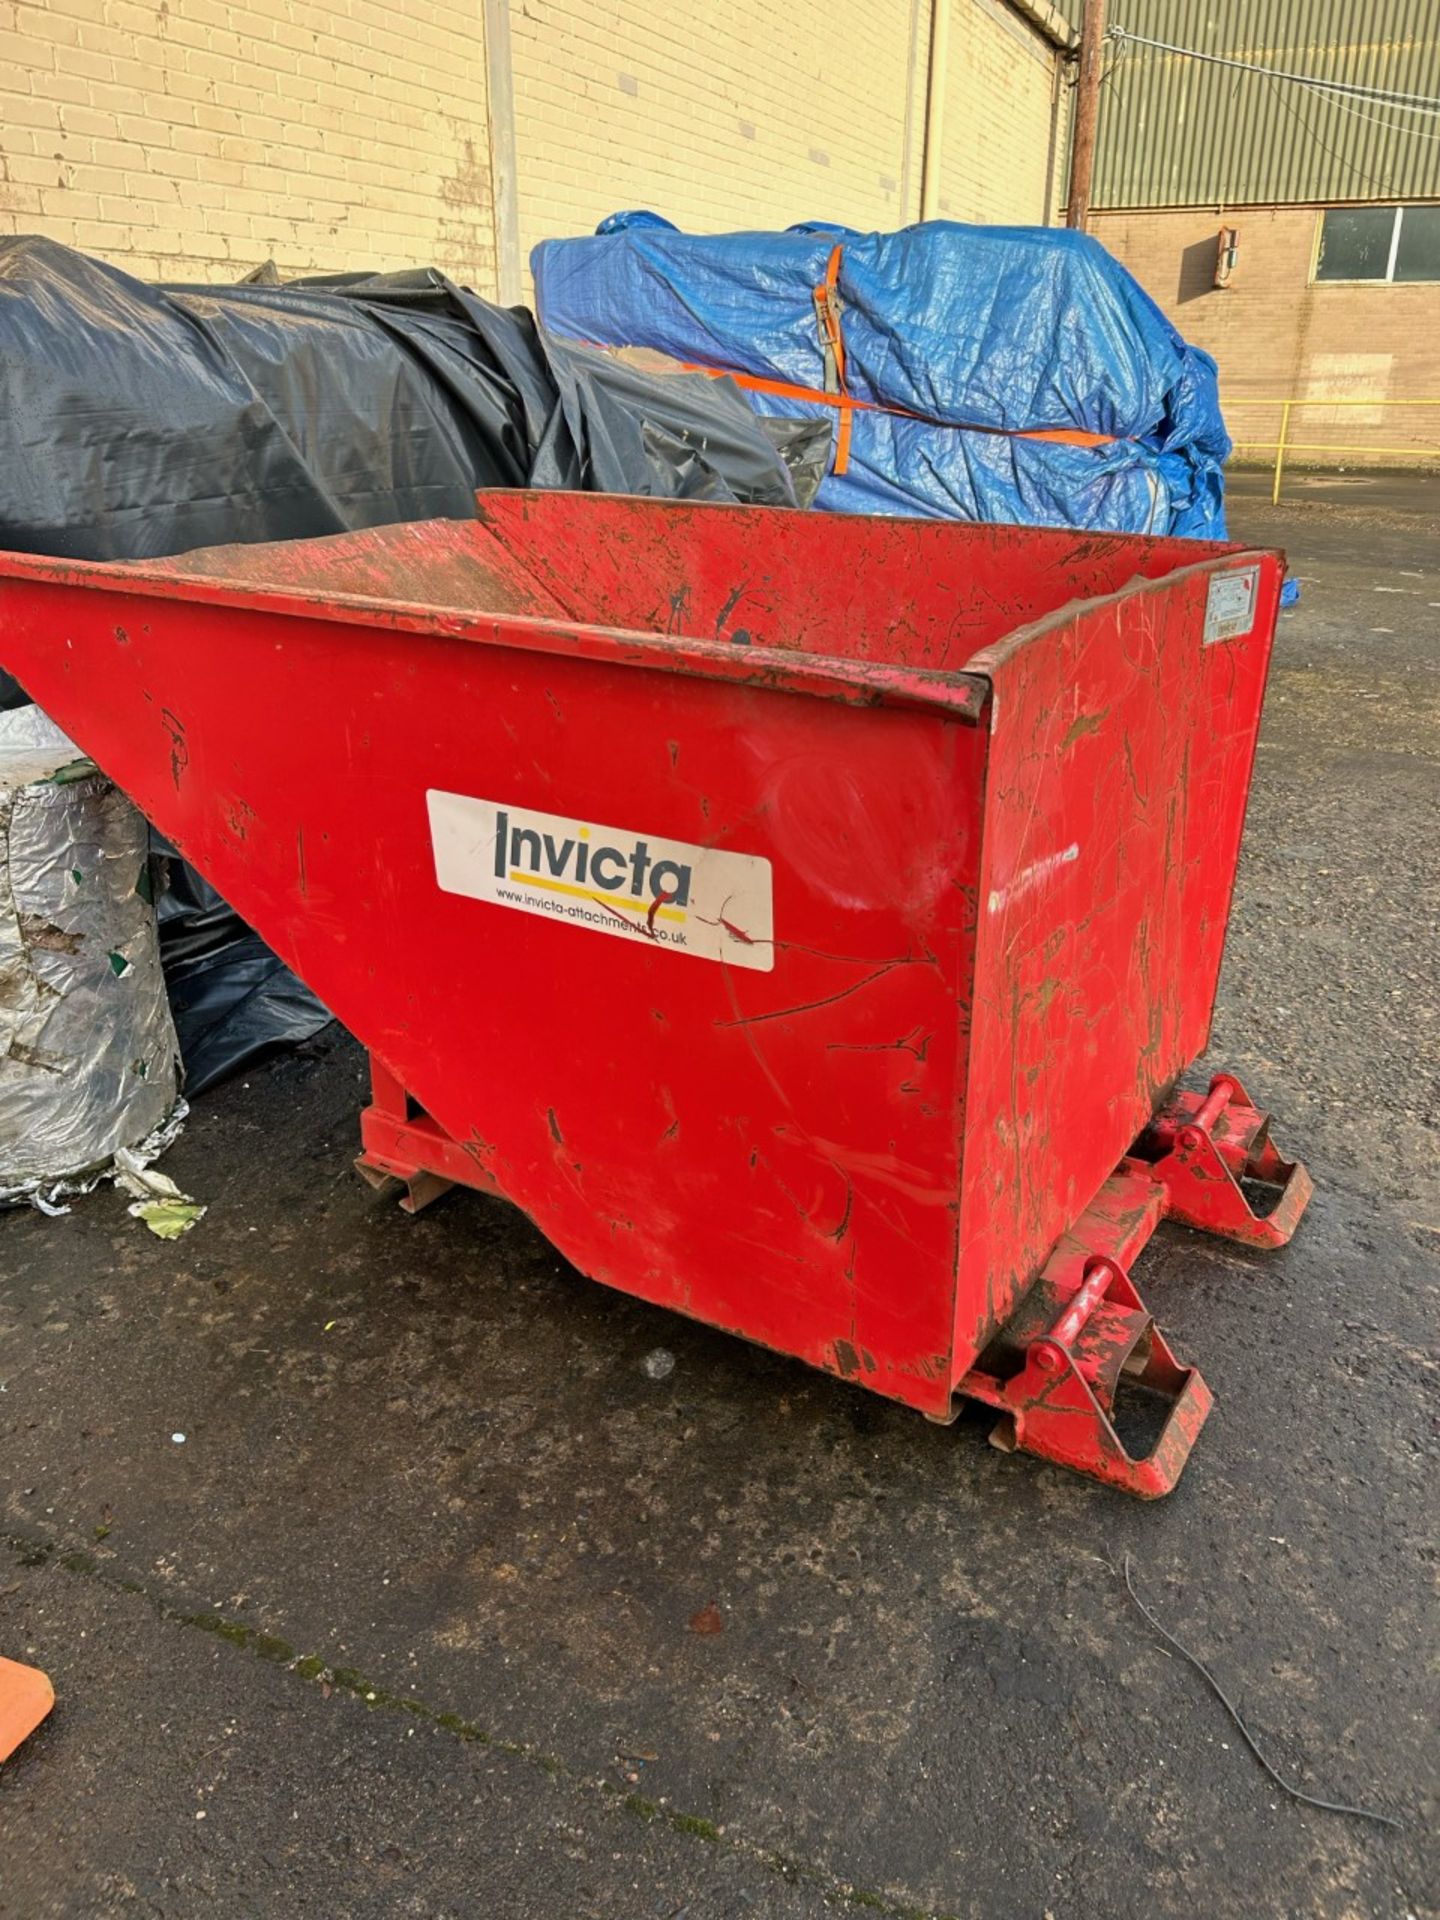 Invicta tipping skip for fork lifts. Good condition